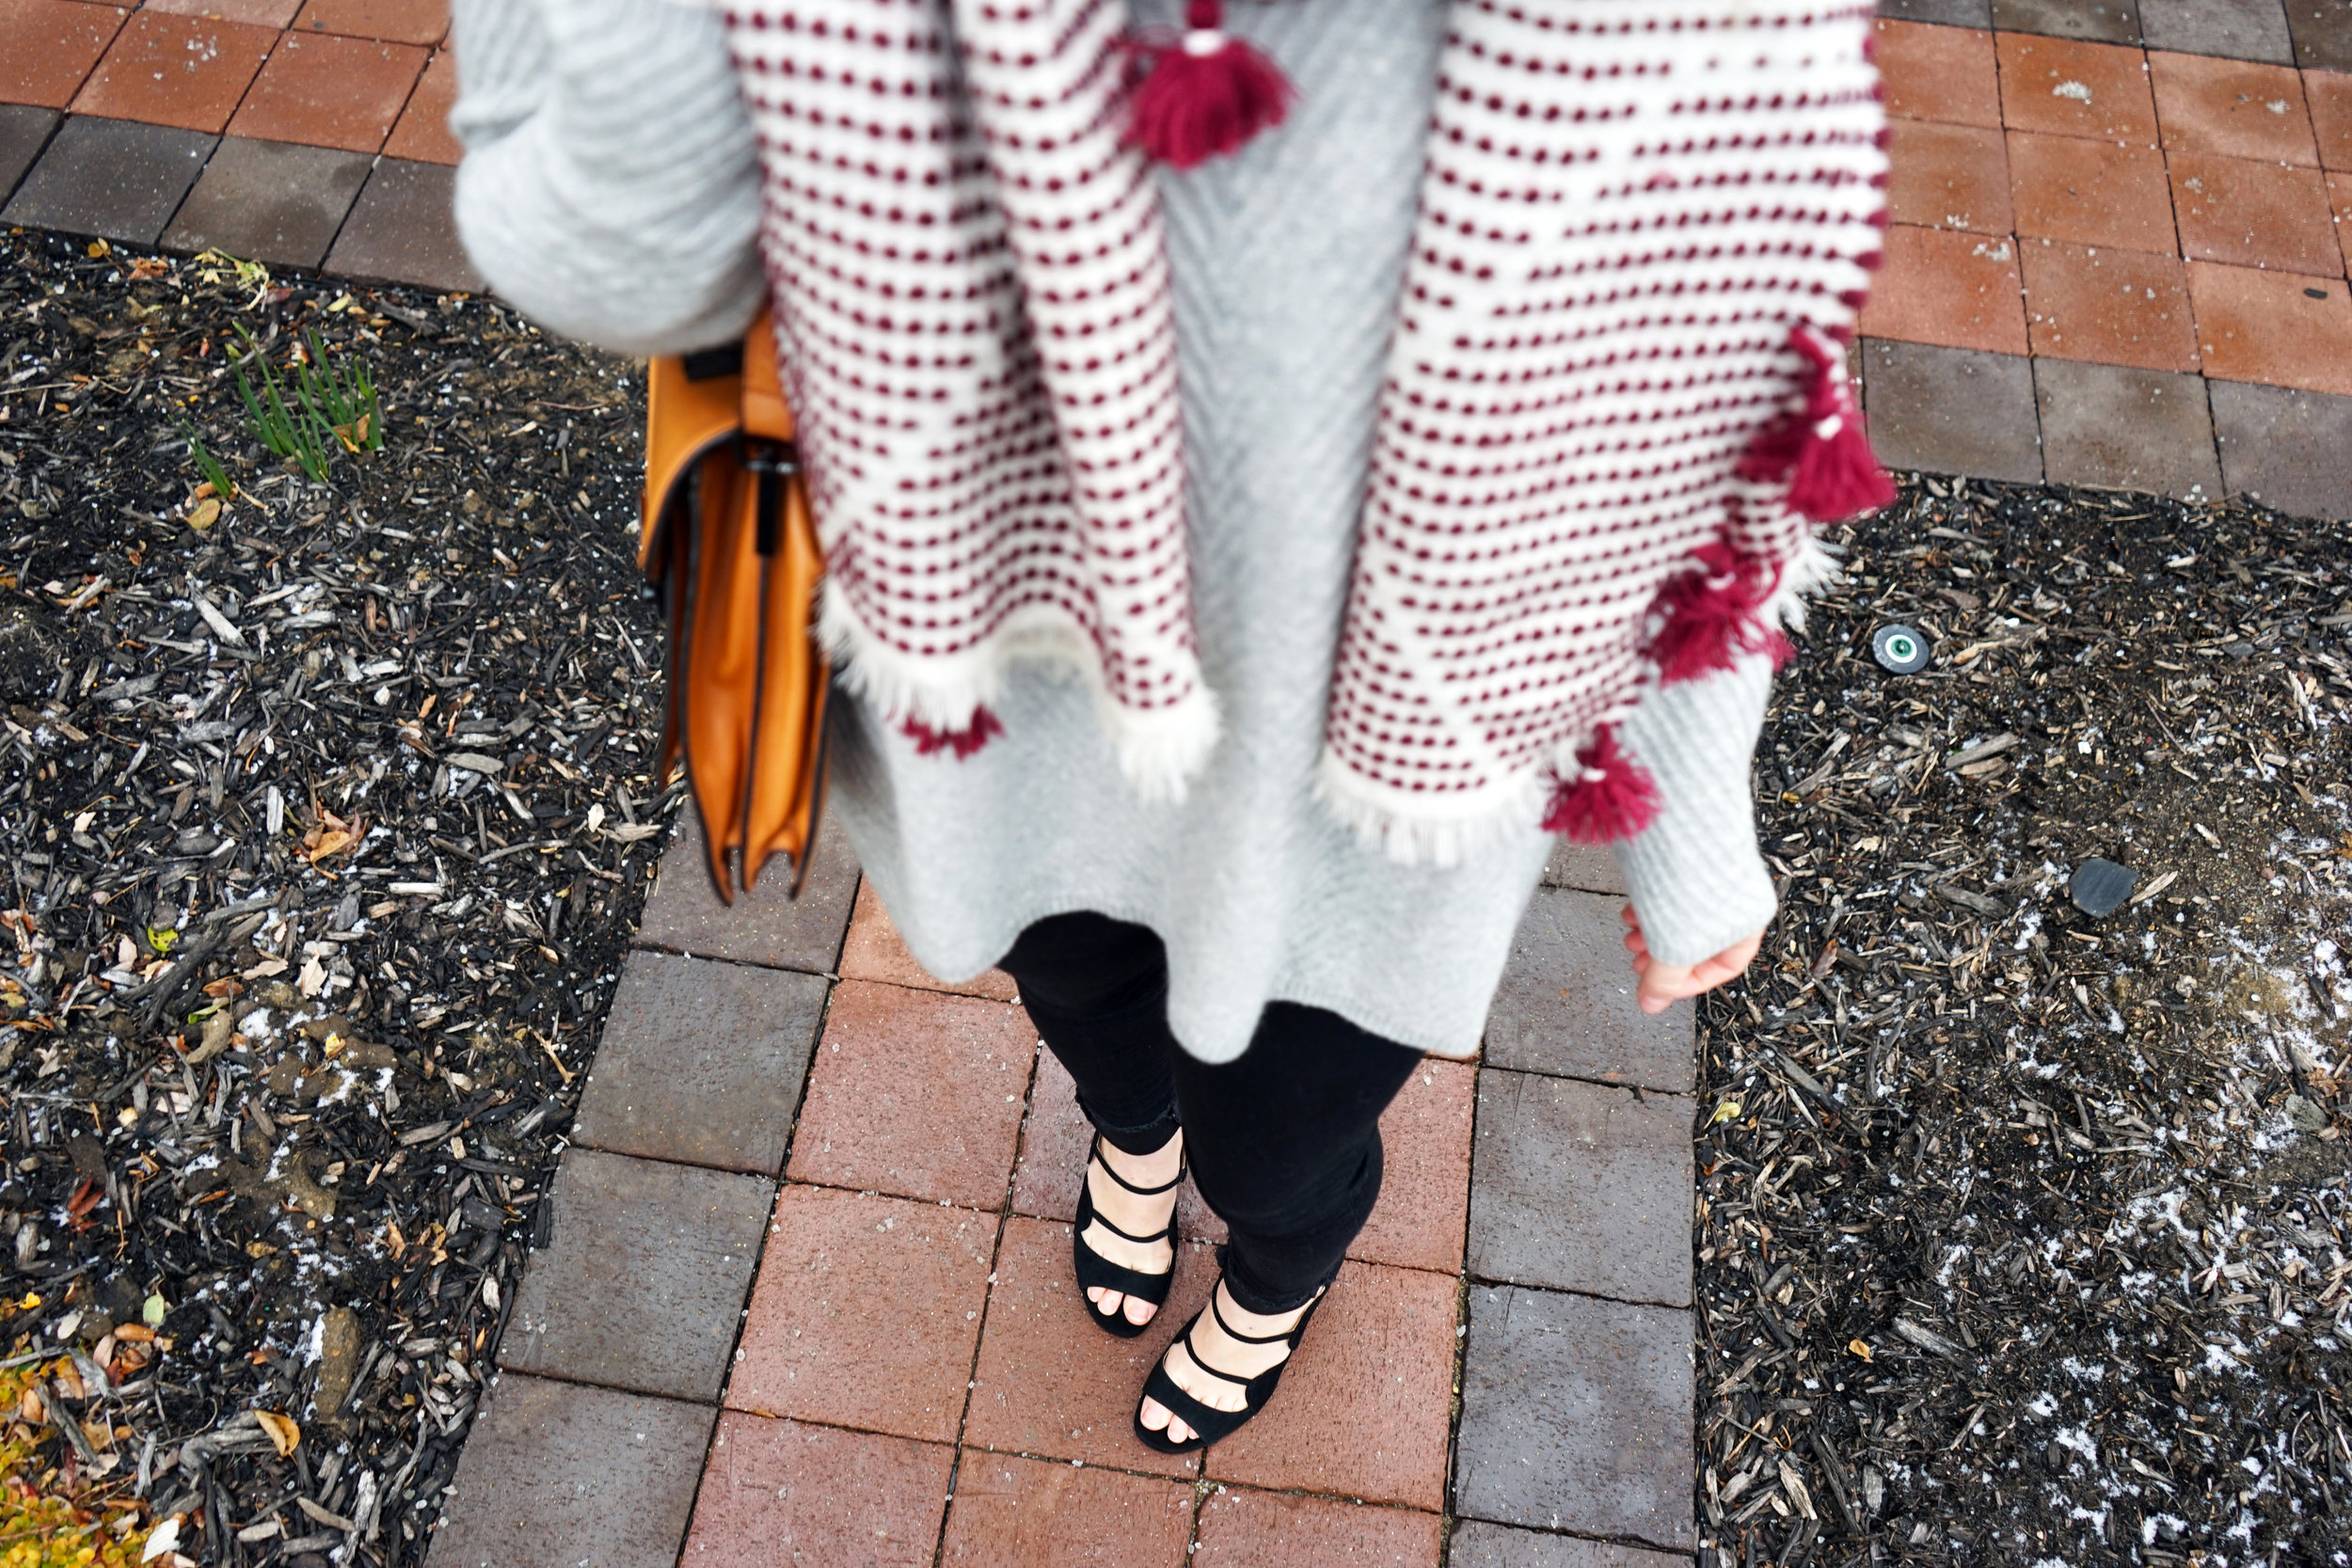 Maggie a la Mode - Madewell Diamond-Dash Tassel Scarf, Nordstrom Collection Chevron Cashmere Sweater, AG High-Waisted Skinny Jeans, Ann Taylor Ashton Suede Scalloped Heels, Loeffler Randall Rider Bag